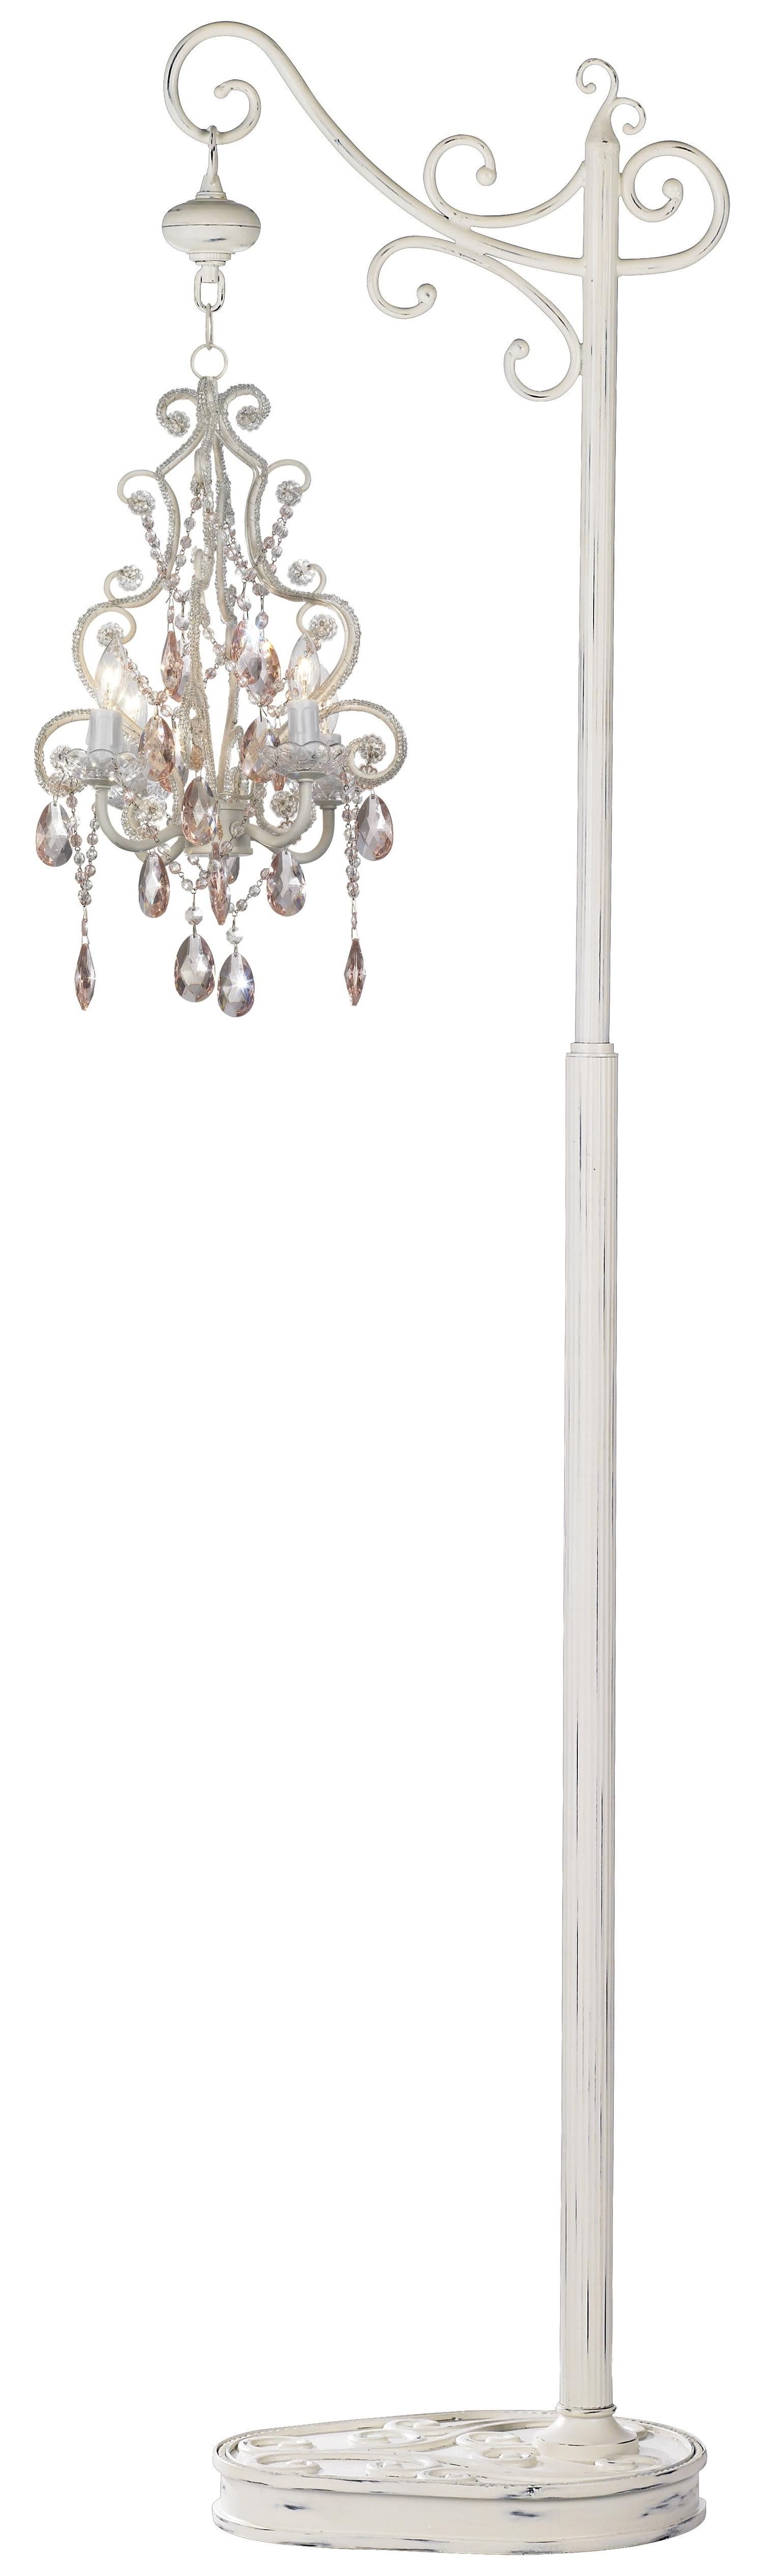 Denise Case (princessbridal3) Leila Collection Pink And Clear Glass Throughout Latest Free Standing Chandelier Lamps (View 4 of 20)